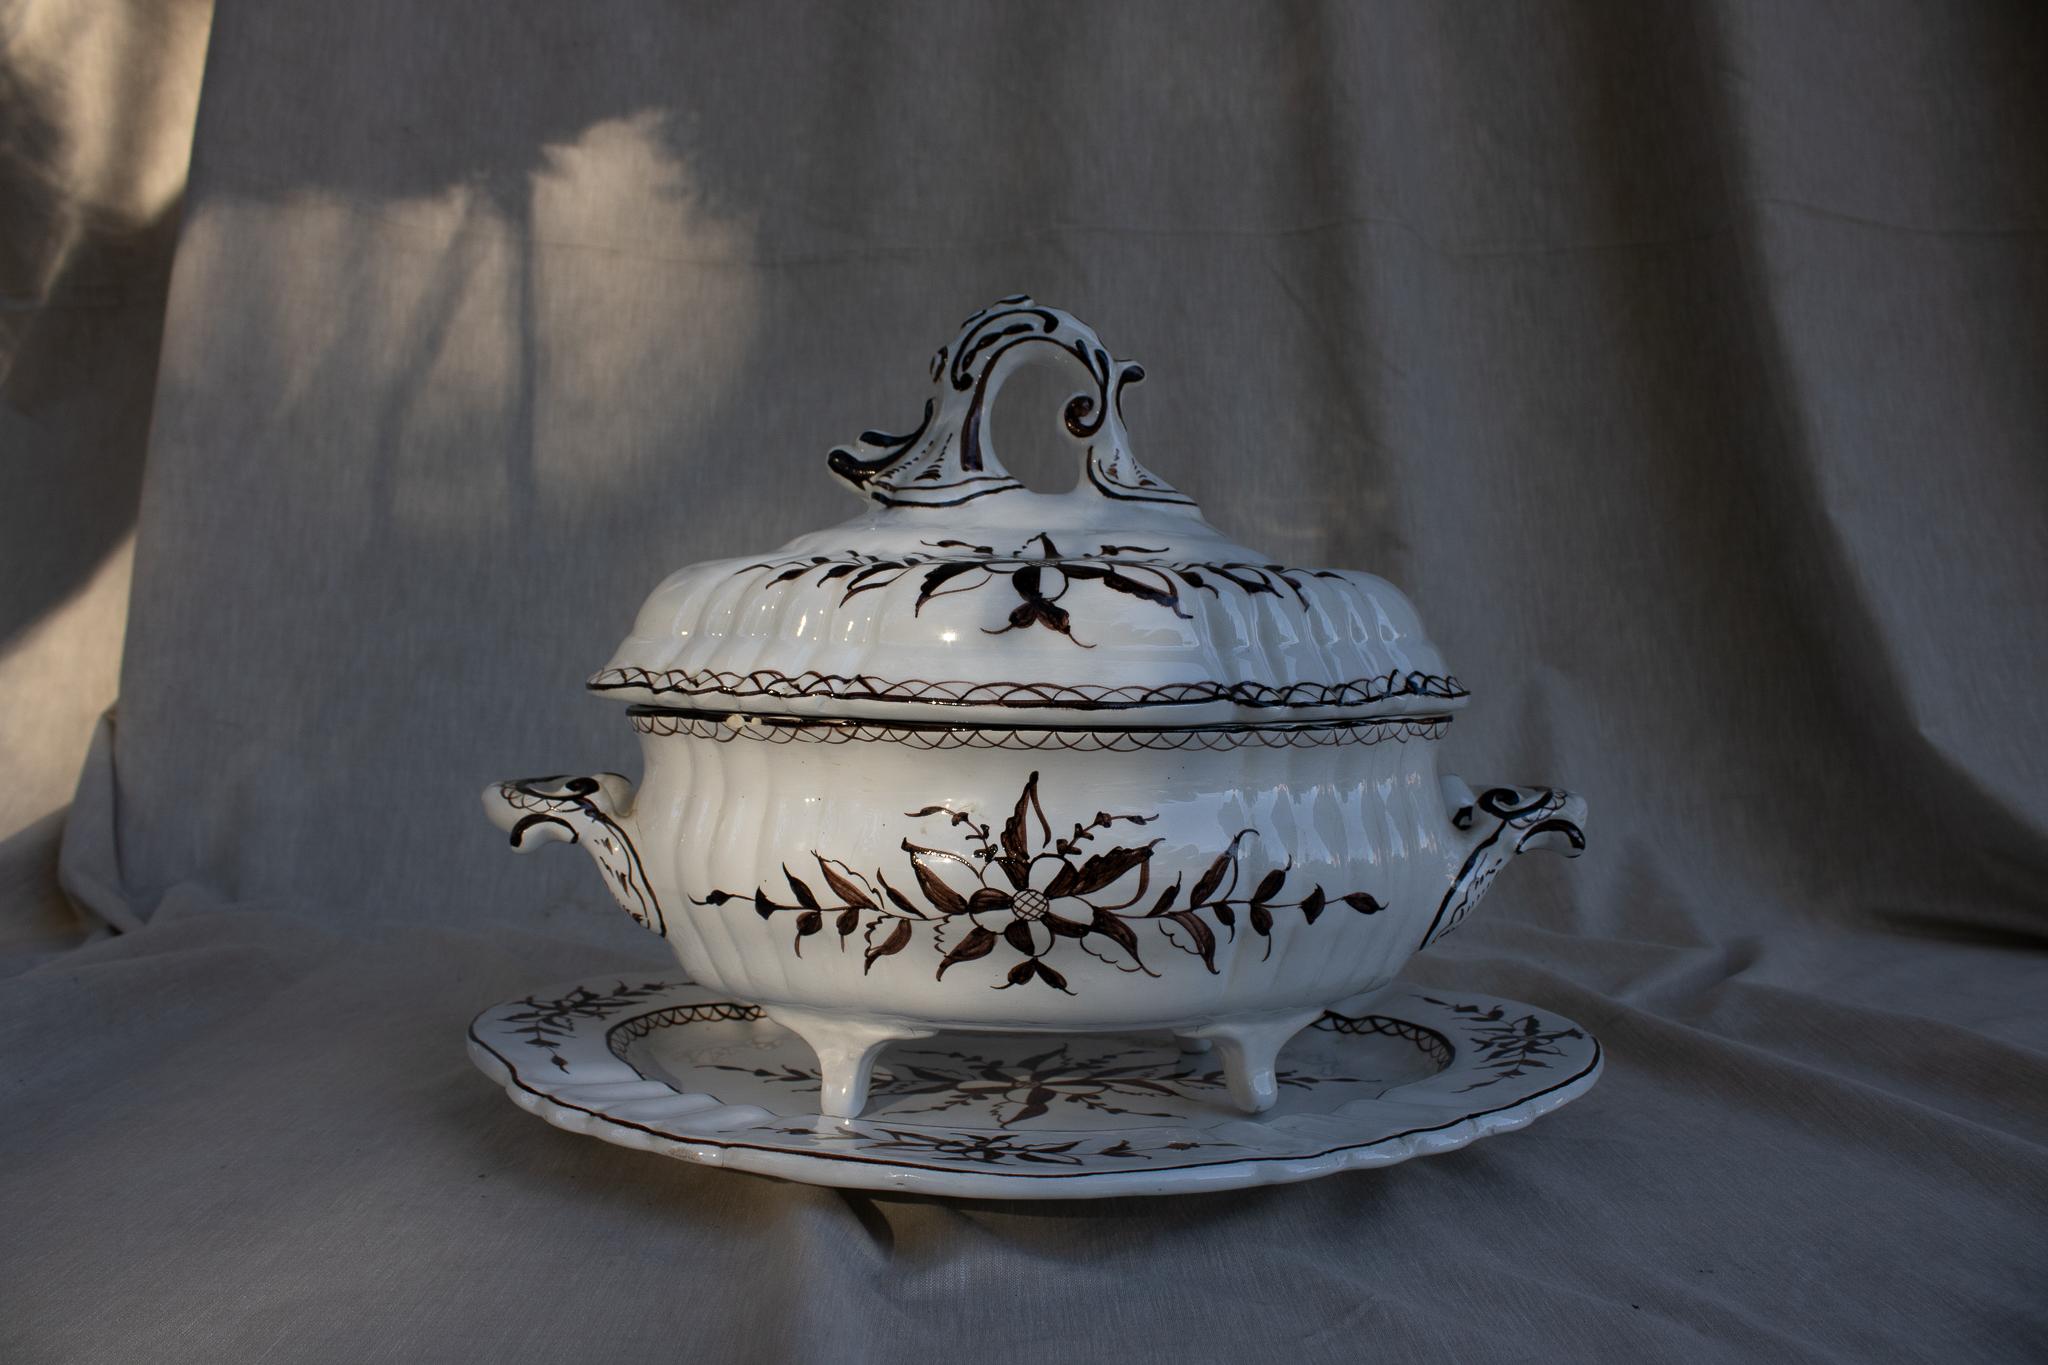 Hand-Crafted XX Century Juncal Ceramic Style Tureen & Platter For Sale